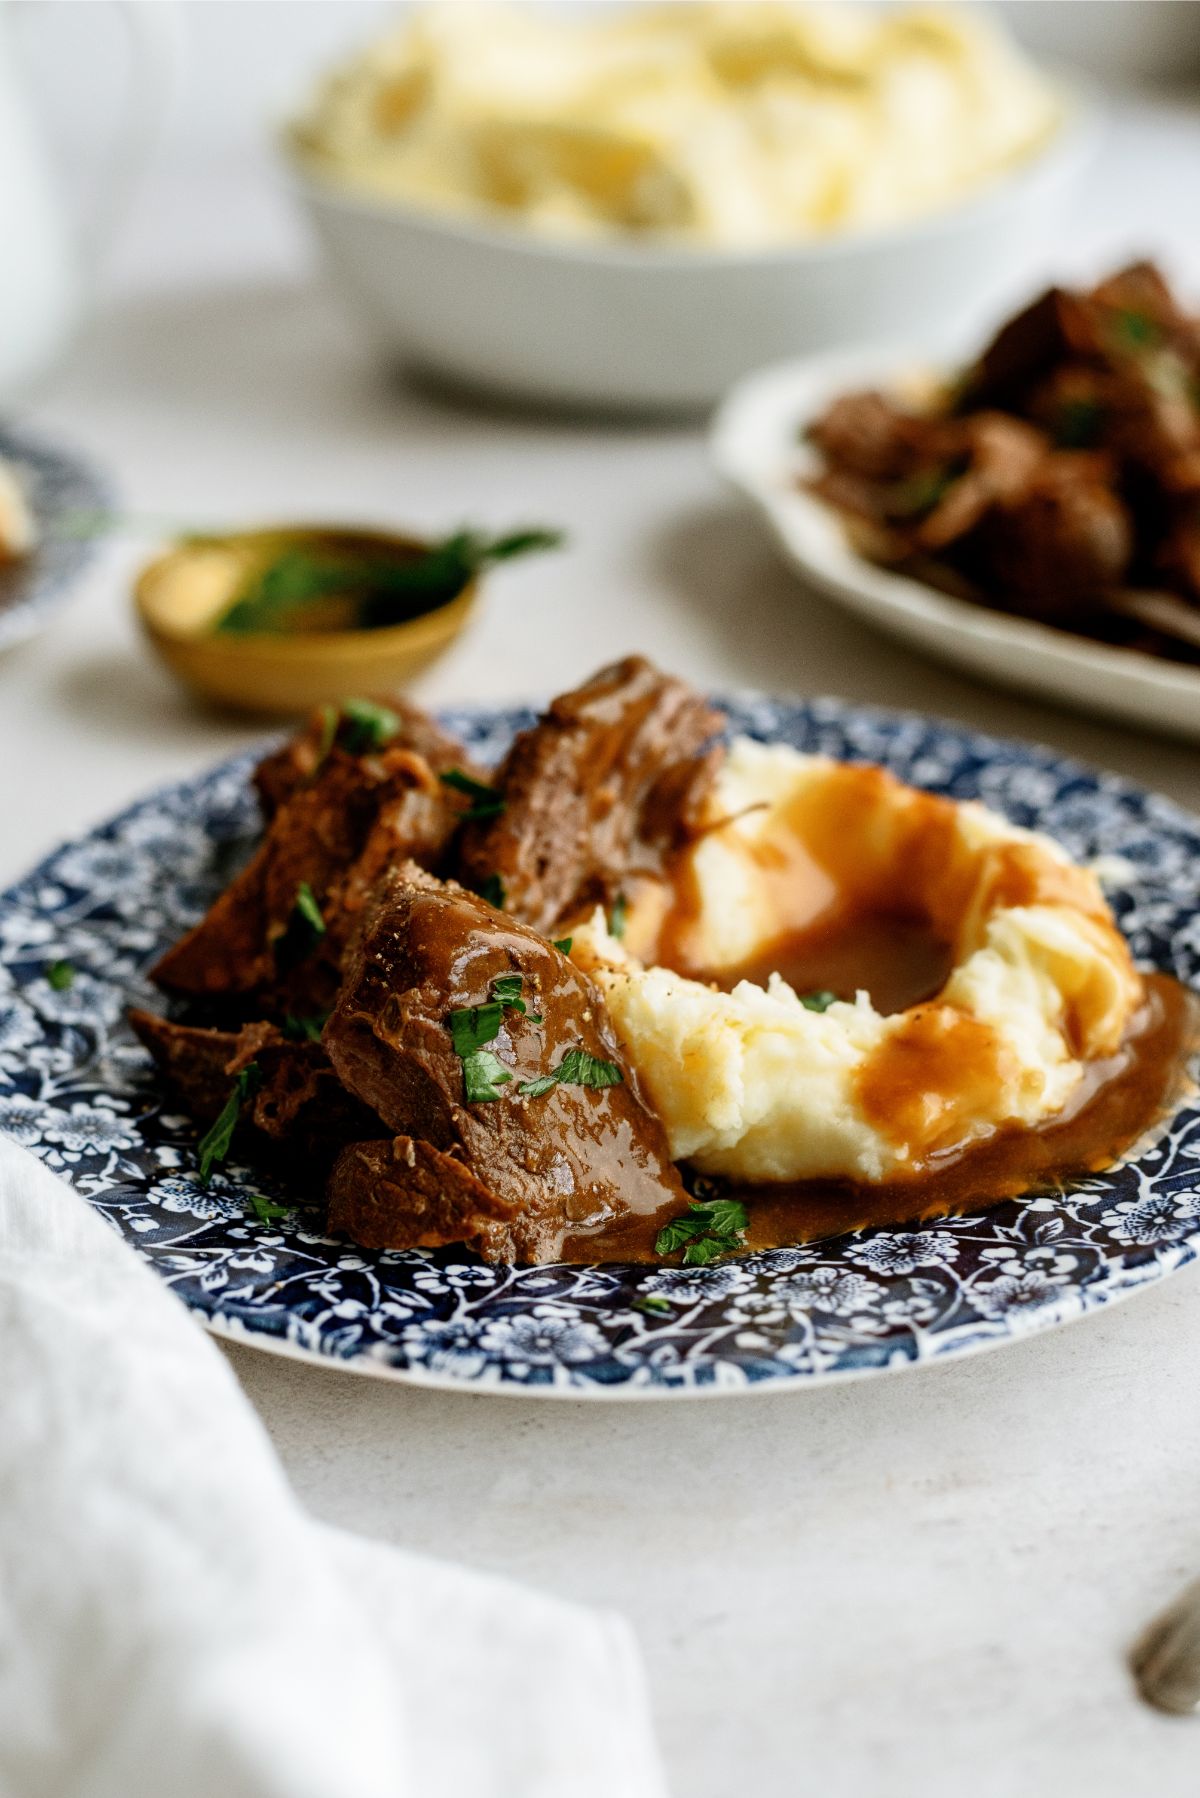 Instant Pot Texas Roadhouse Pot Roast with mashed potatoes and gravy on a plate